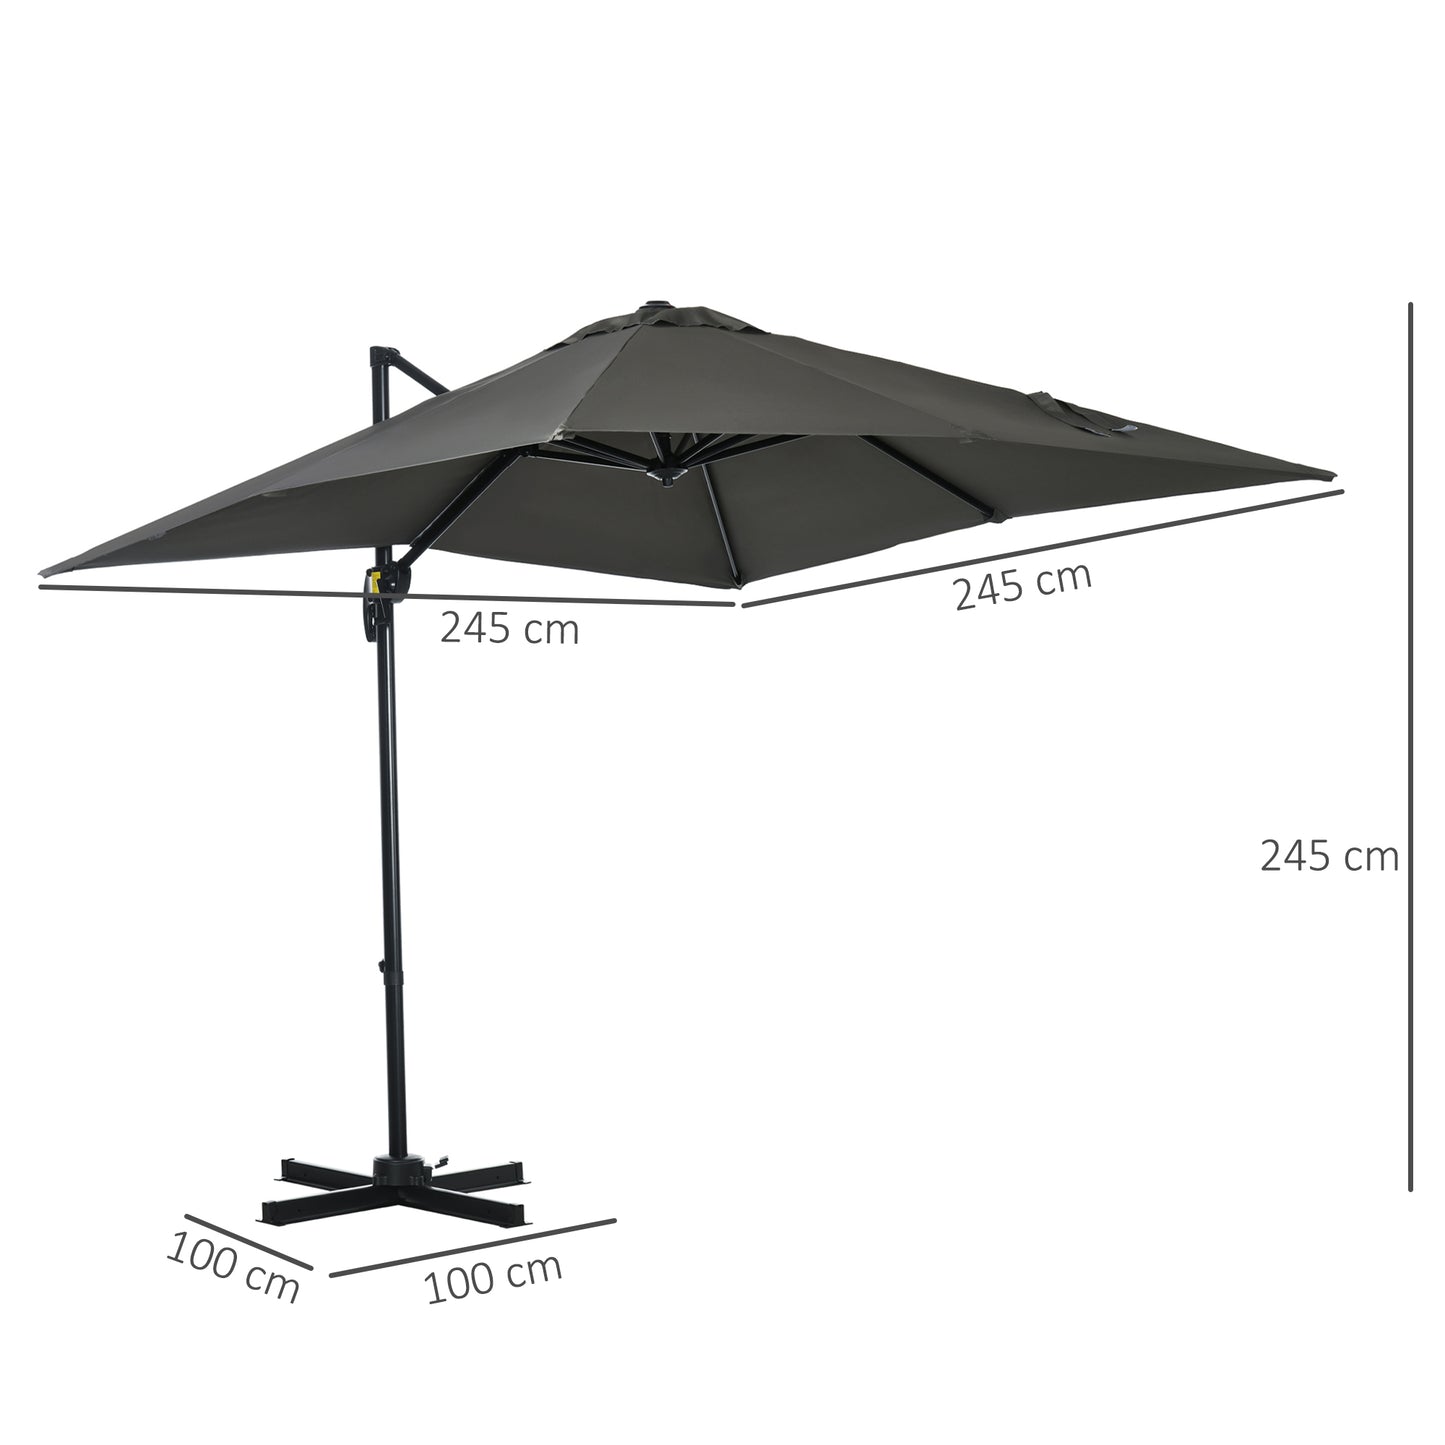 Outsunny 2.5 x 2.5m Patio Offset Parasol Cantilever Umbrella Sun Shade Canopy Shelter 360° Rotation with Crank Handle and Cross Base, Grey